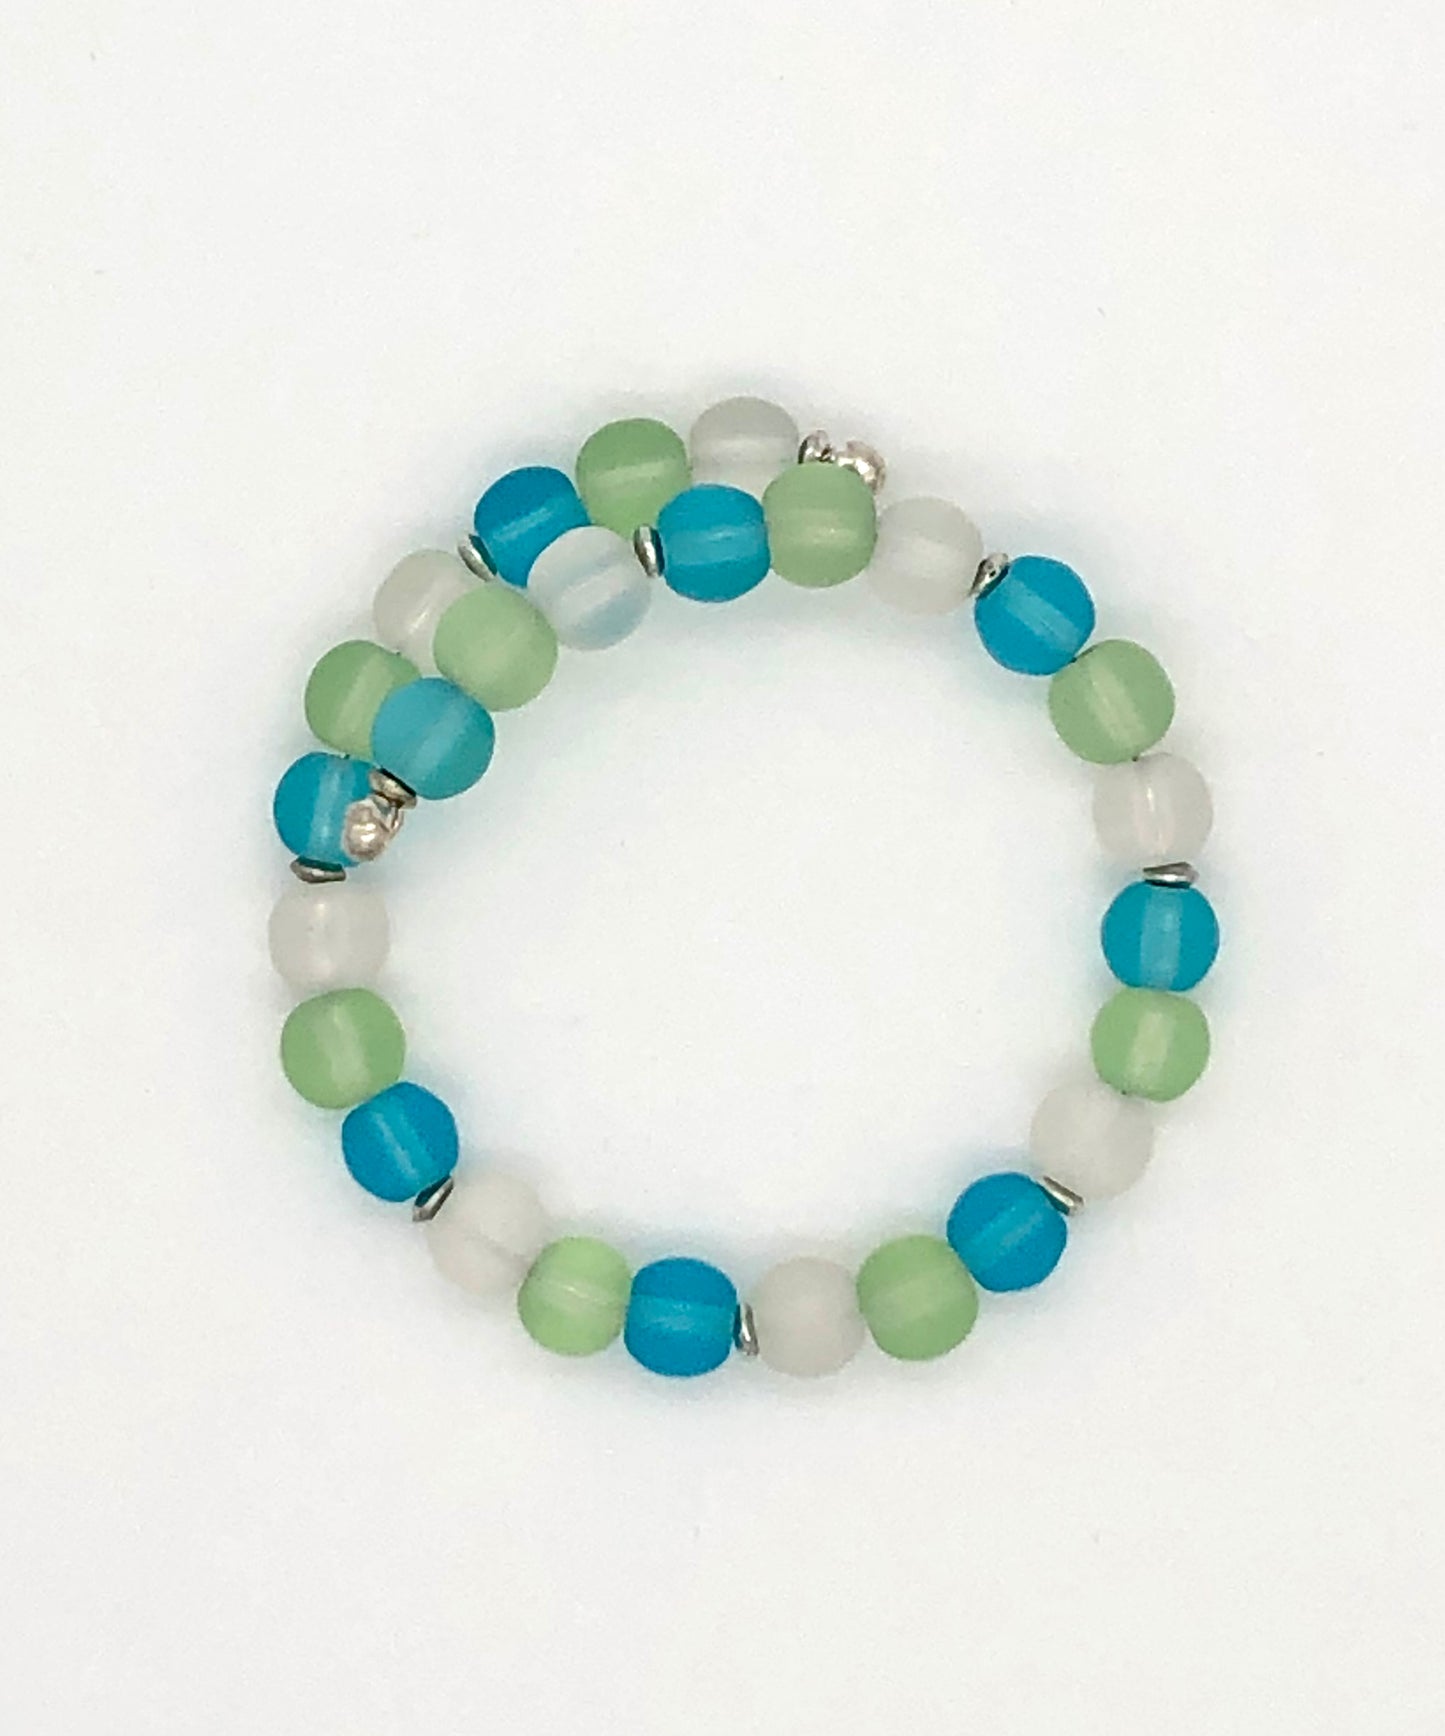 Aqua, light green, and white frosted beads memory wire bracelet